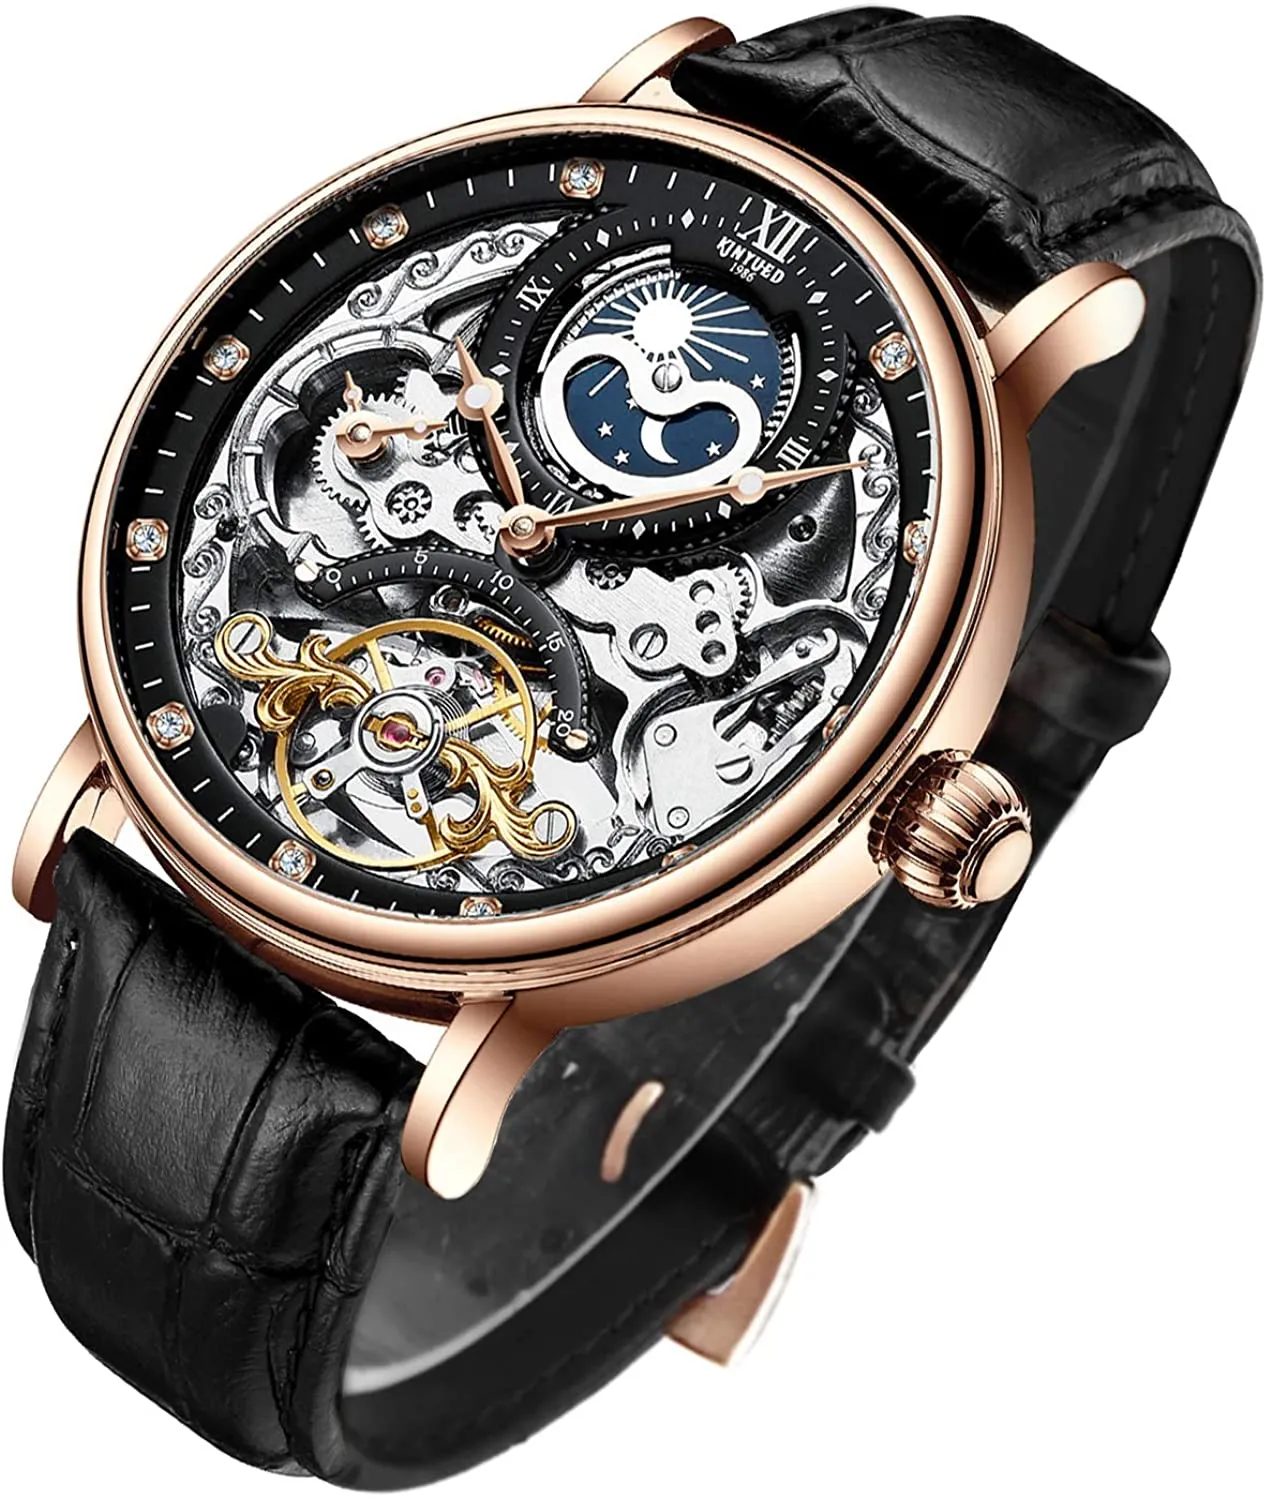 Mens Luxury Skeleton Automatic Mechanical Wrist Watches Leather Moon Phrase Luminous Hands Self-Wind Wristwatch268V